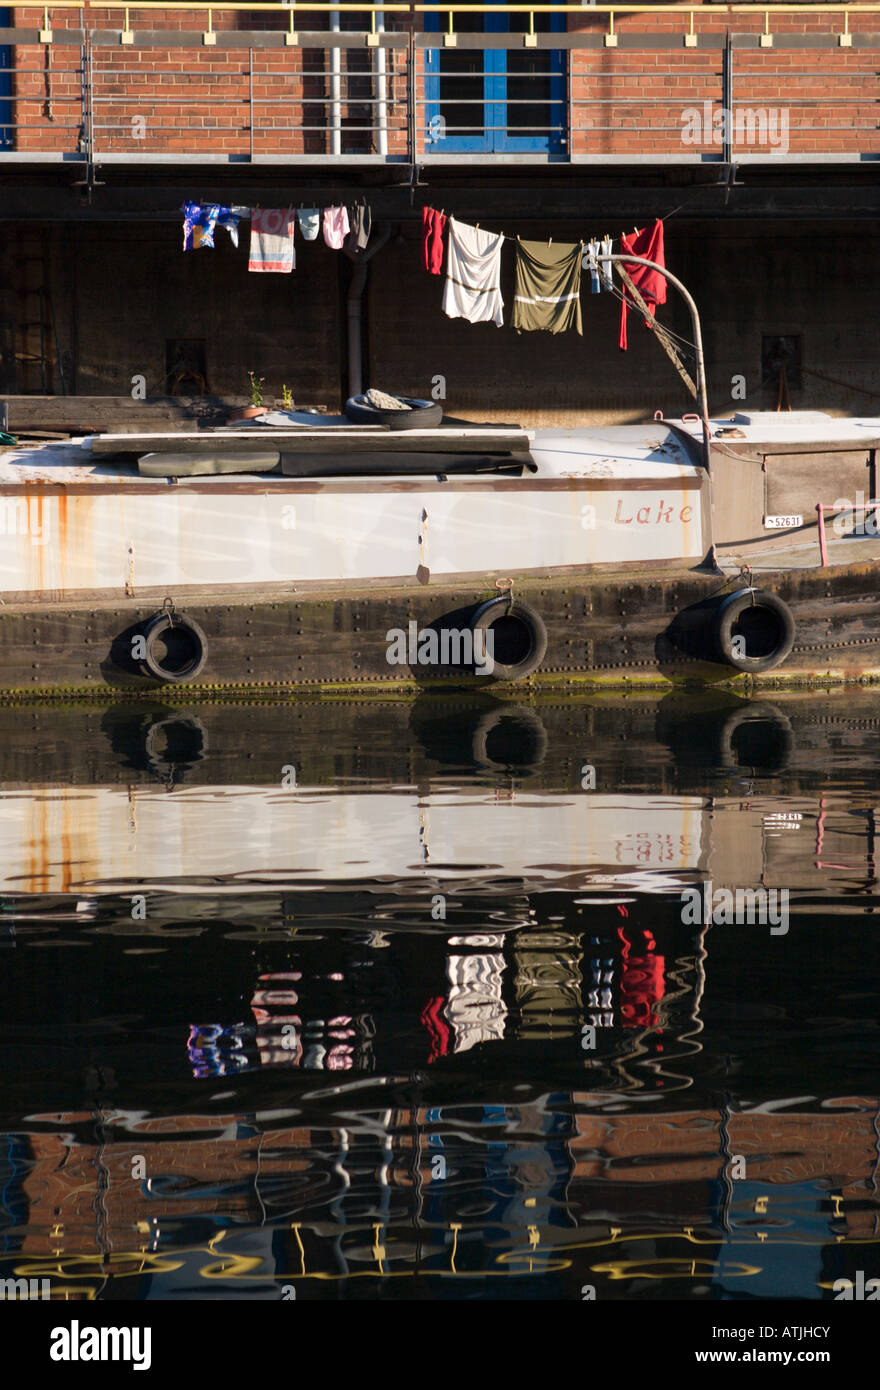 Washing on Canal Boat Reflected in the Water, Leeds, Yorkshire, England, UK Stock Photo